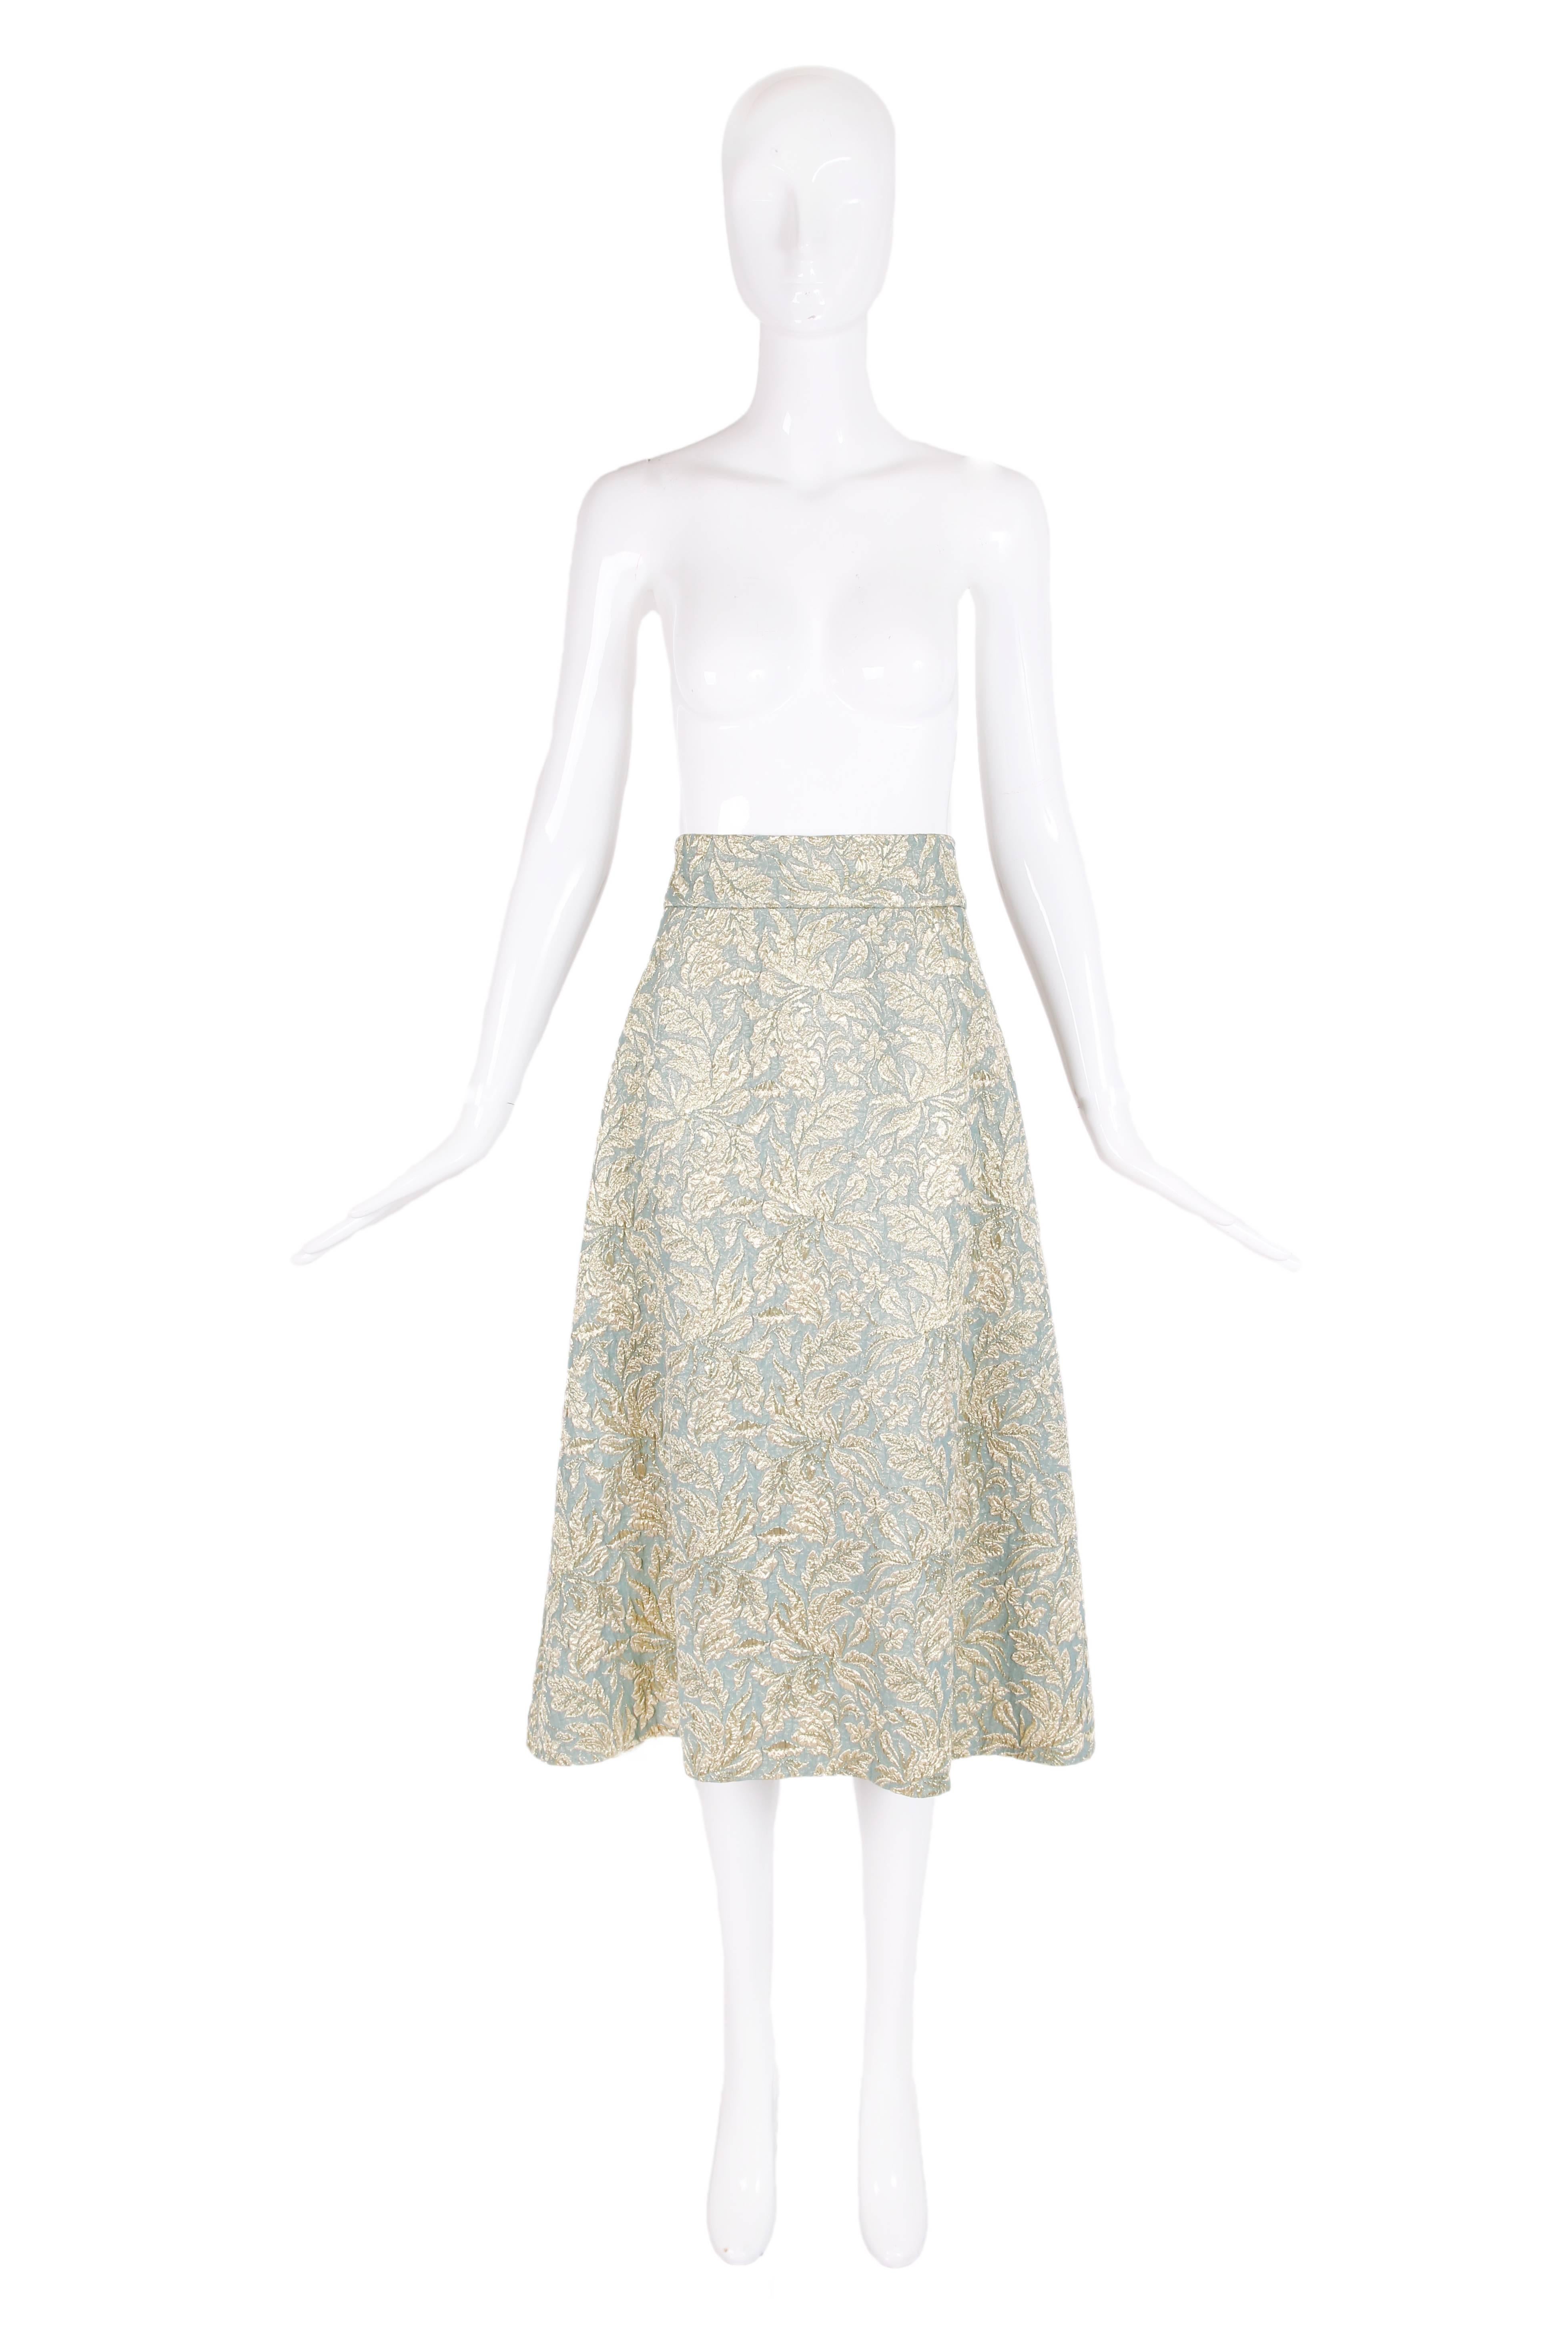 Dolce & Gabbana gold and pale blue metallic foliate pattern flared skirt. In excellent condition - fully lined. Size 46.
Waist - 31"
Length - 31"